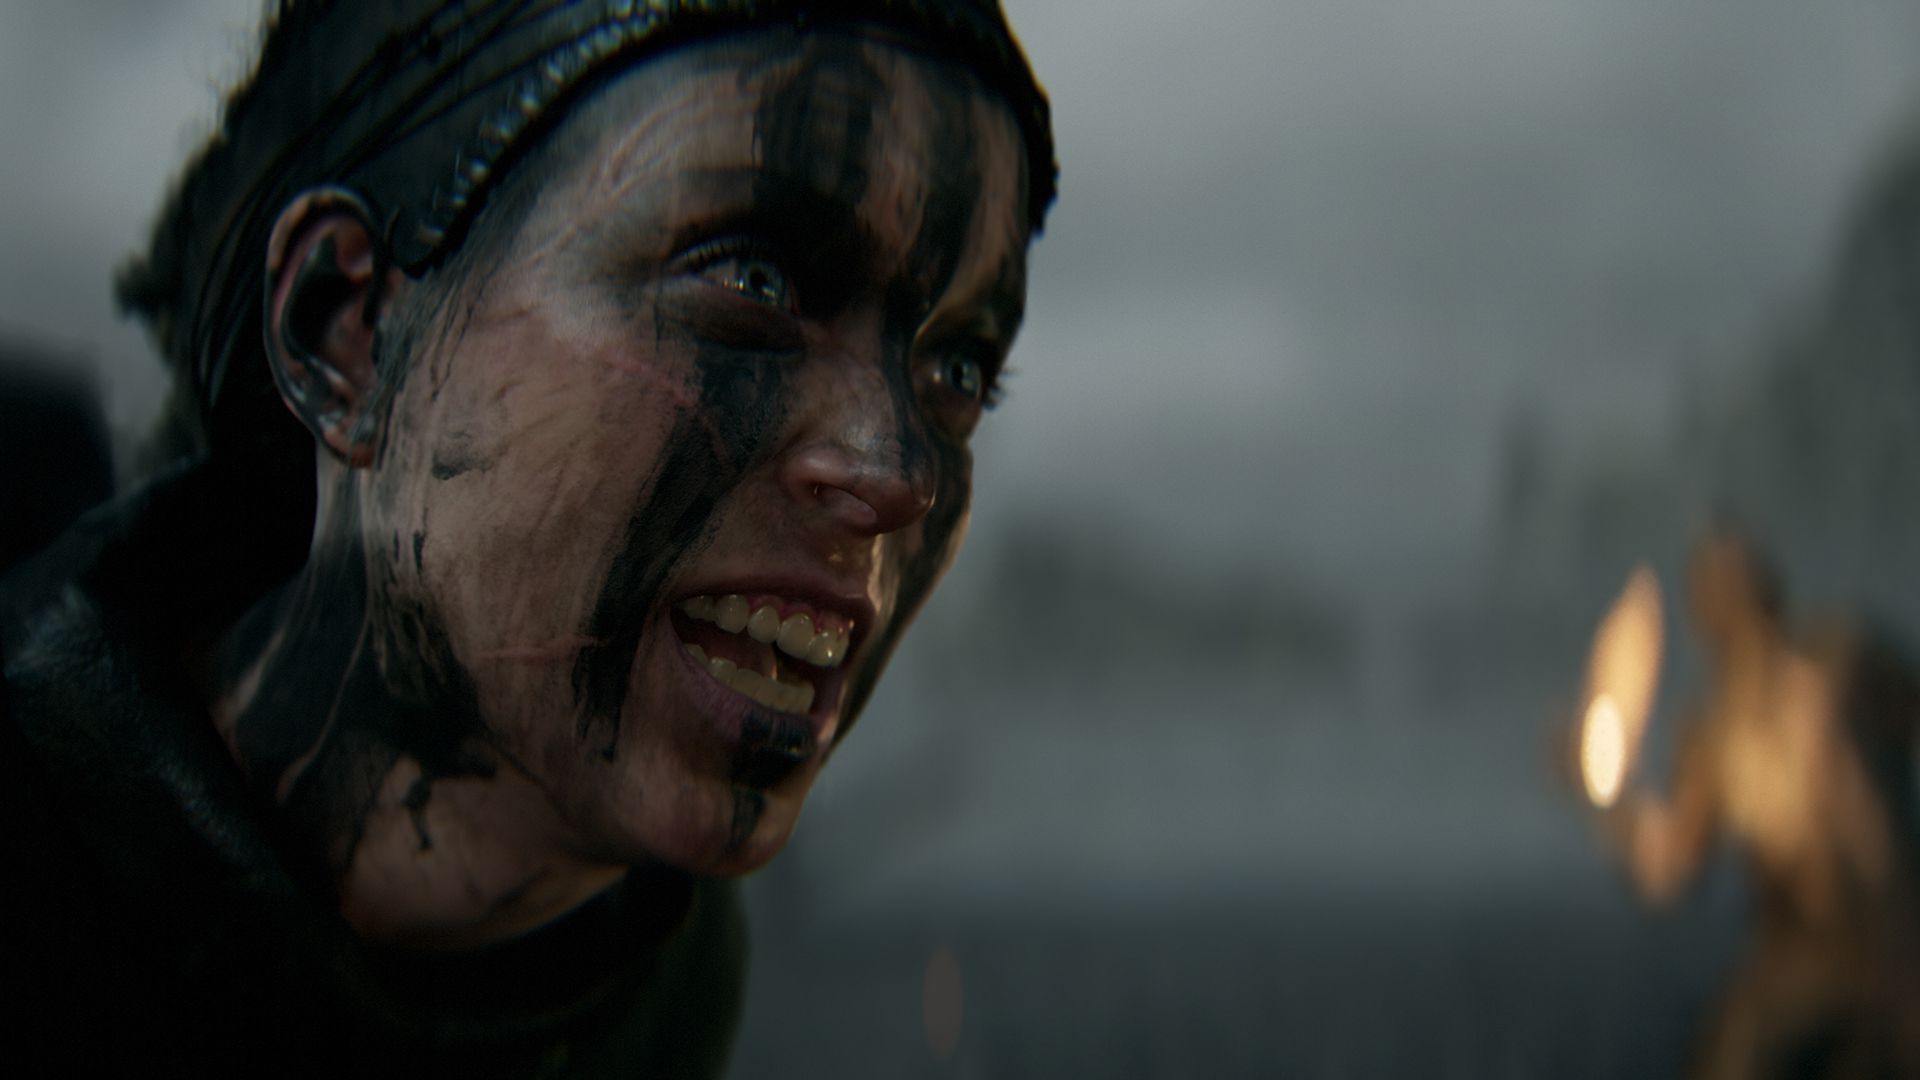 Screenshot of a person's face streaked with soot in a gameplay trailer